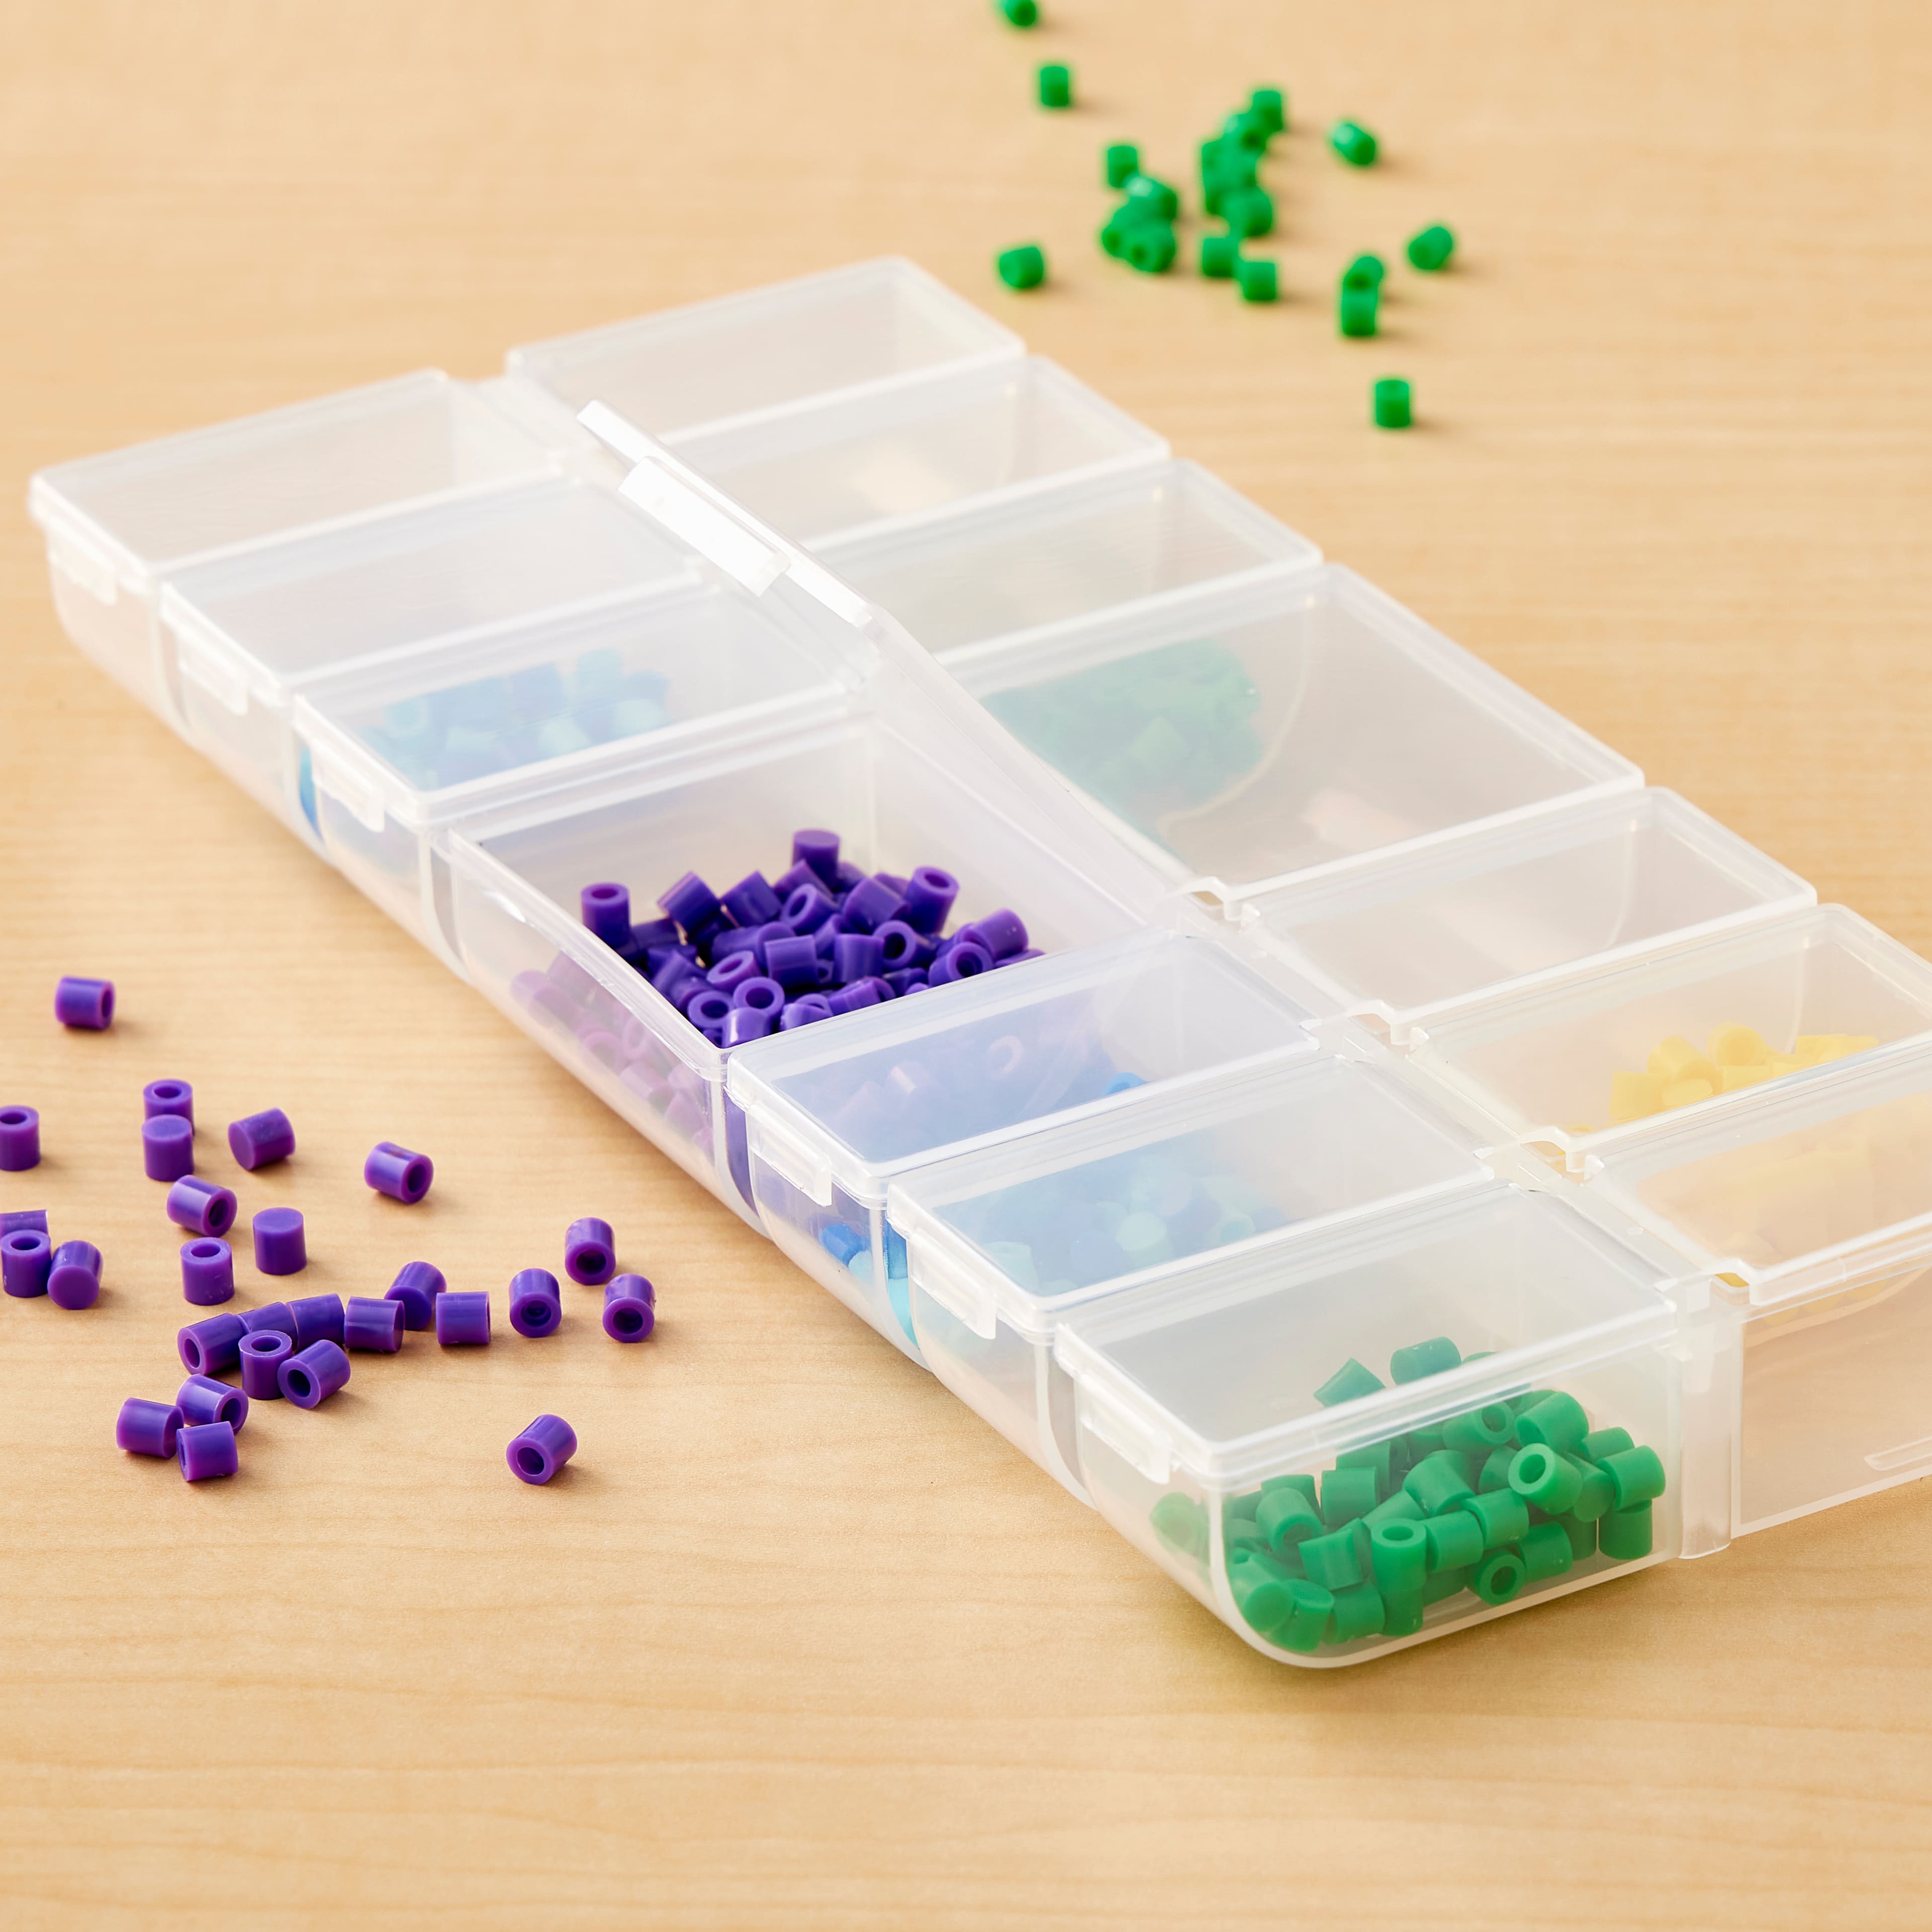 LAIFU Small Storage Boxes, 14pcs Inner Bead Organizers Mini Clear Bead Storage Containers Plastic Storage Box With Lid For Collecting Small Items